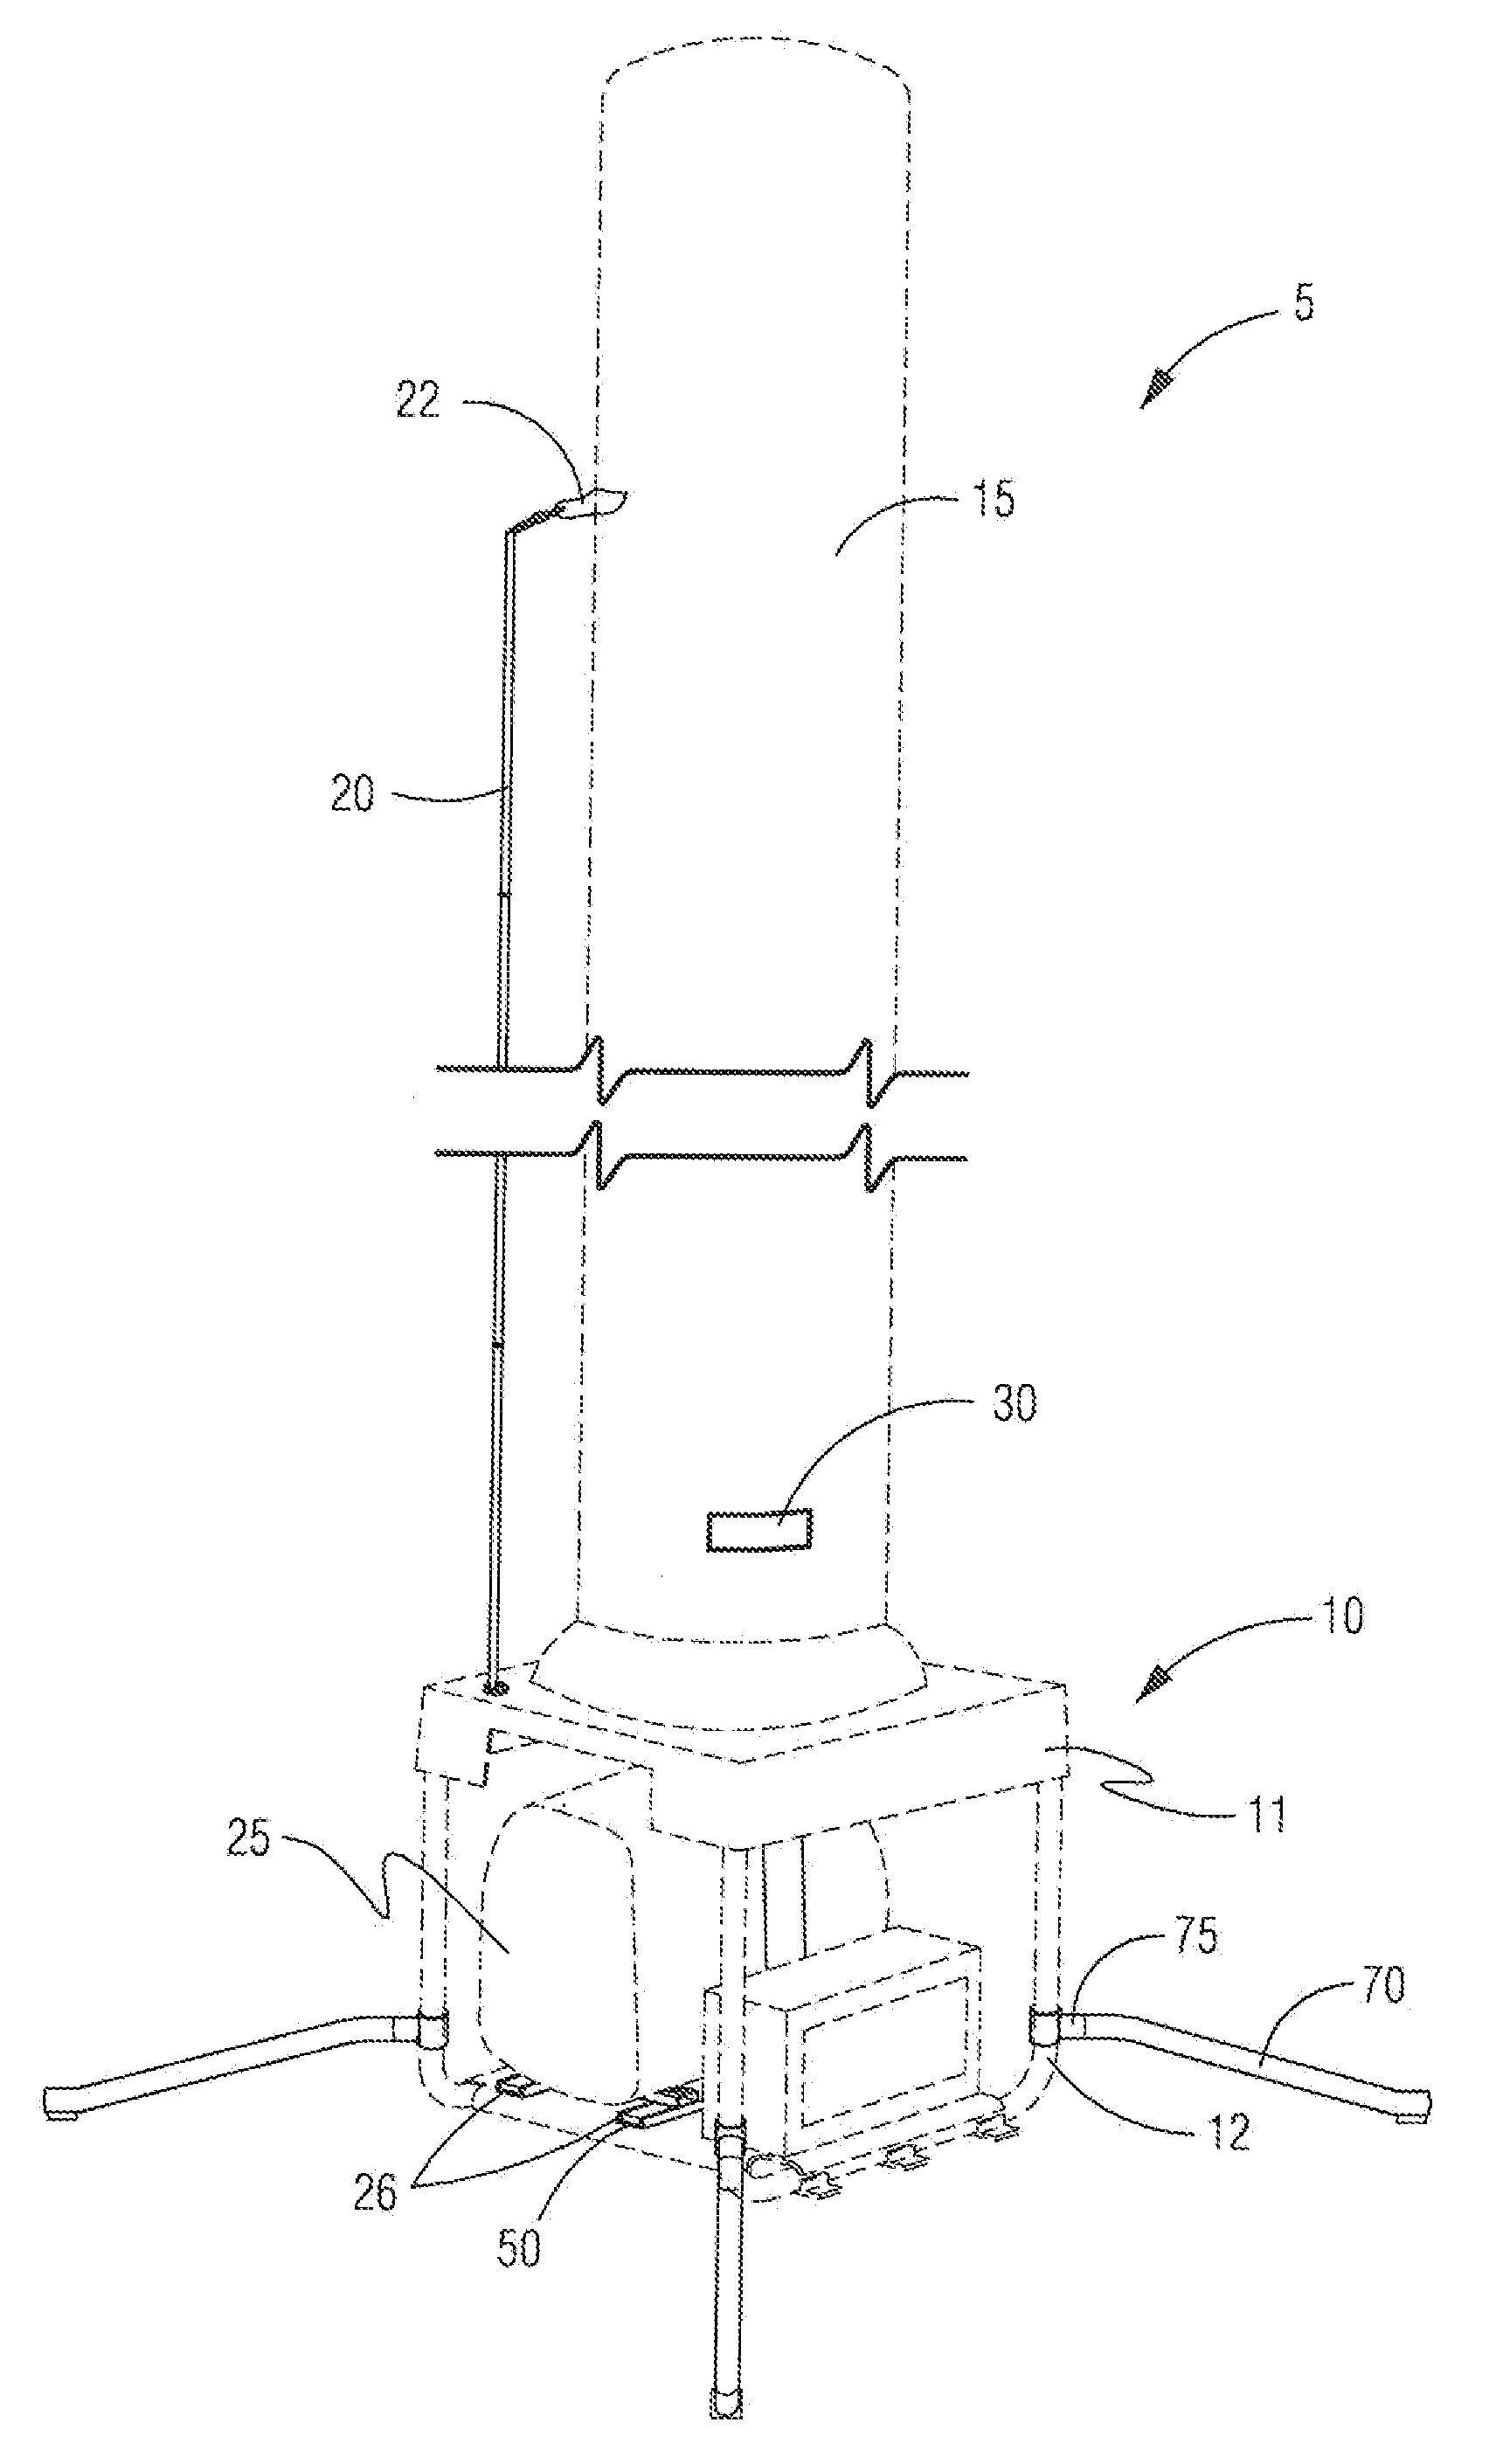 Temporary and / or emergency lighting system with inflatable bearing structure